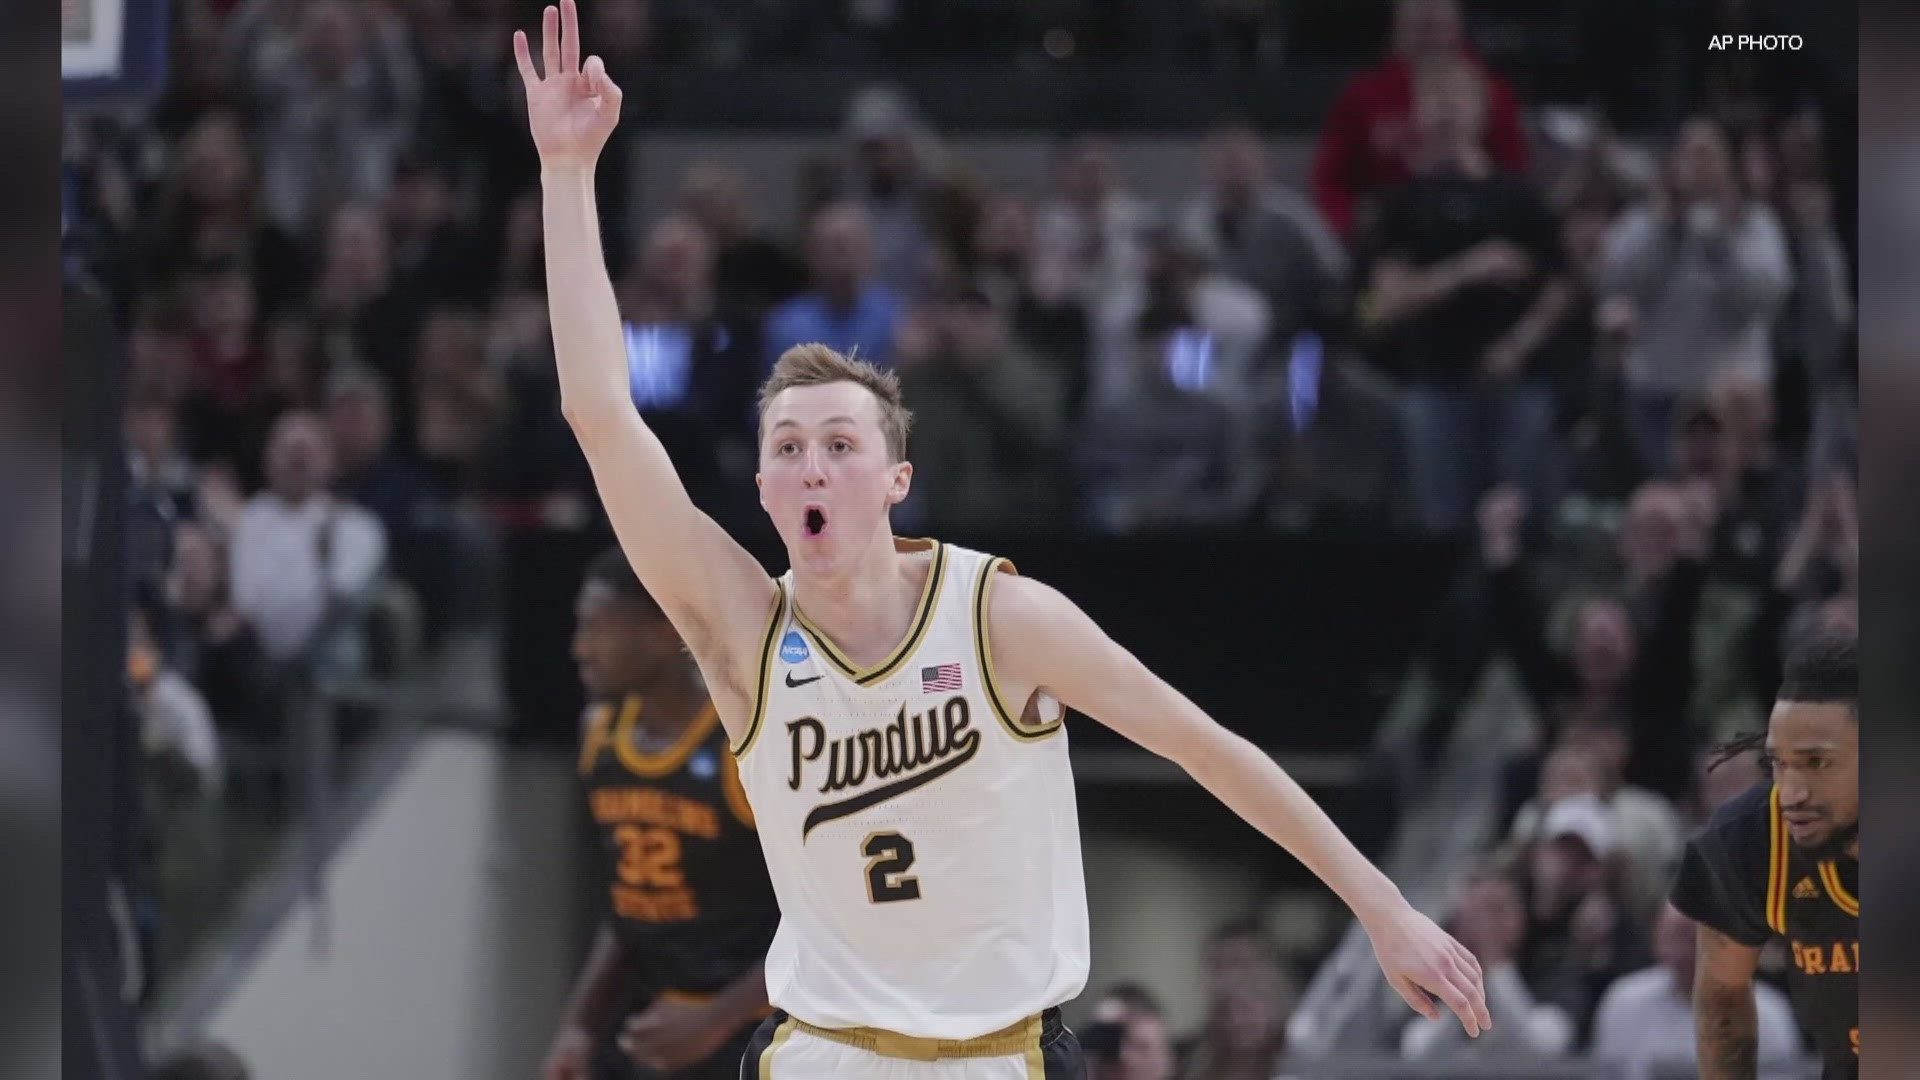 Some fans were breathing a sigh of relief as Purdue emerged from a first-round matchup.